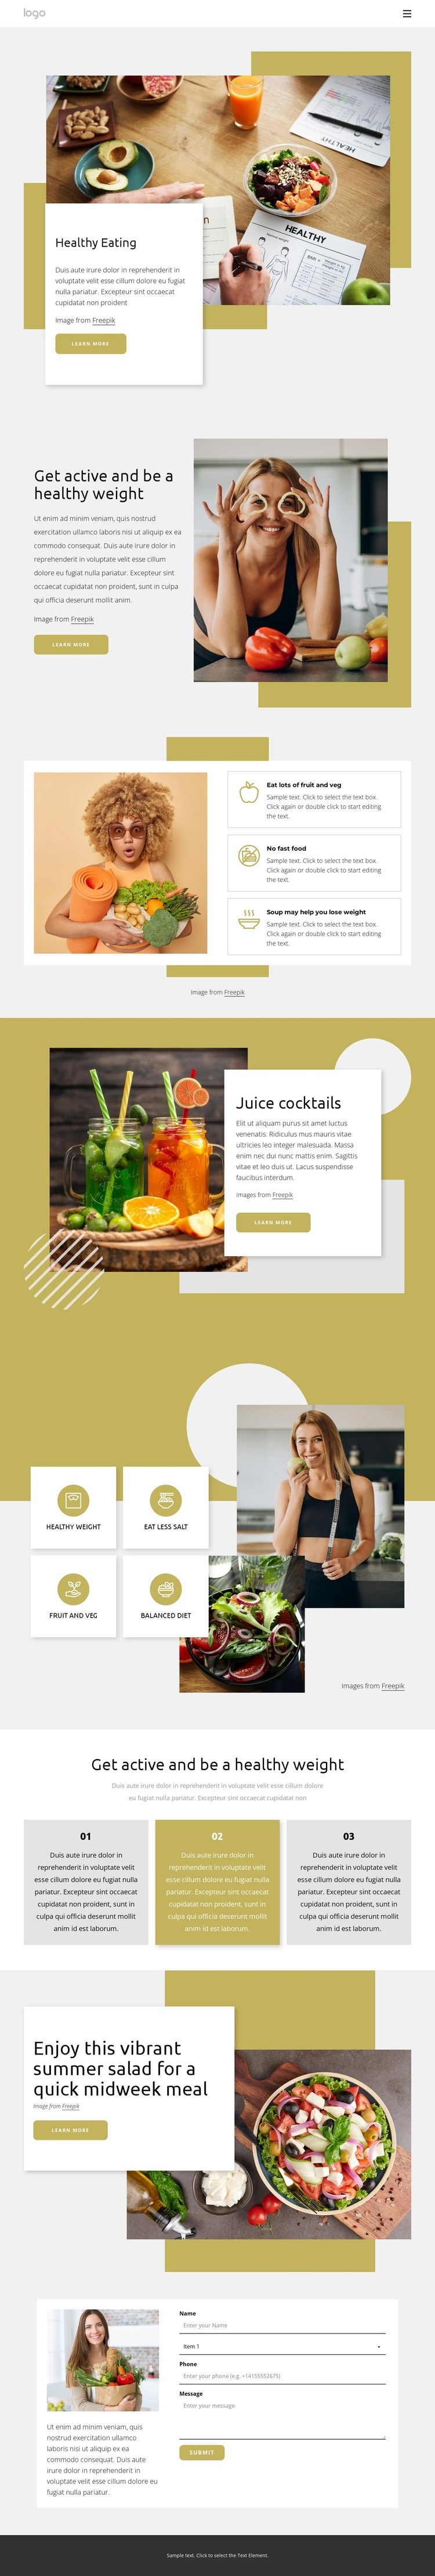 Focus on healthy eating Squarespace Template Alternative